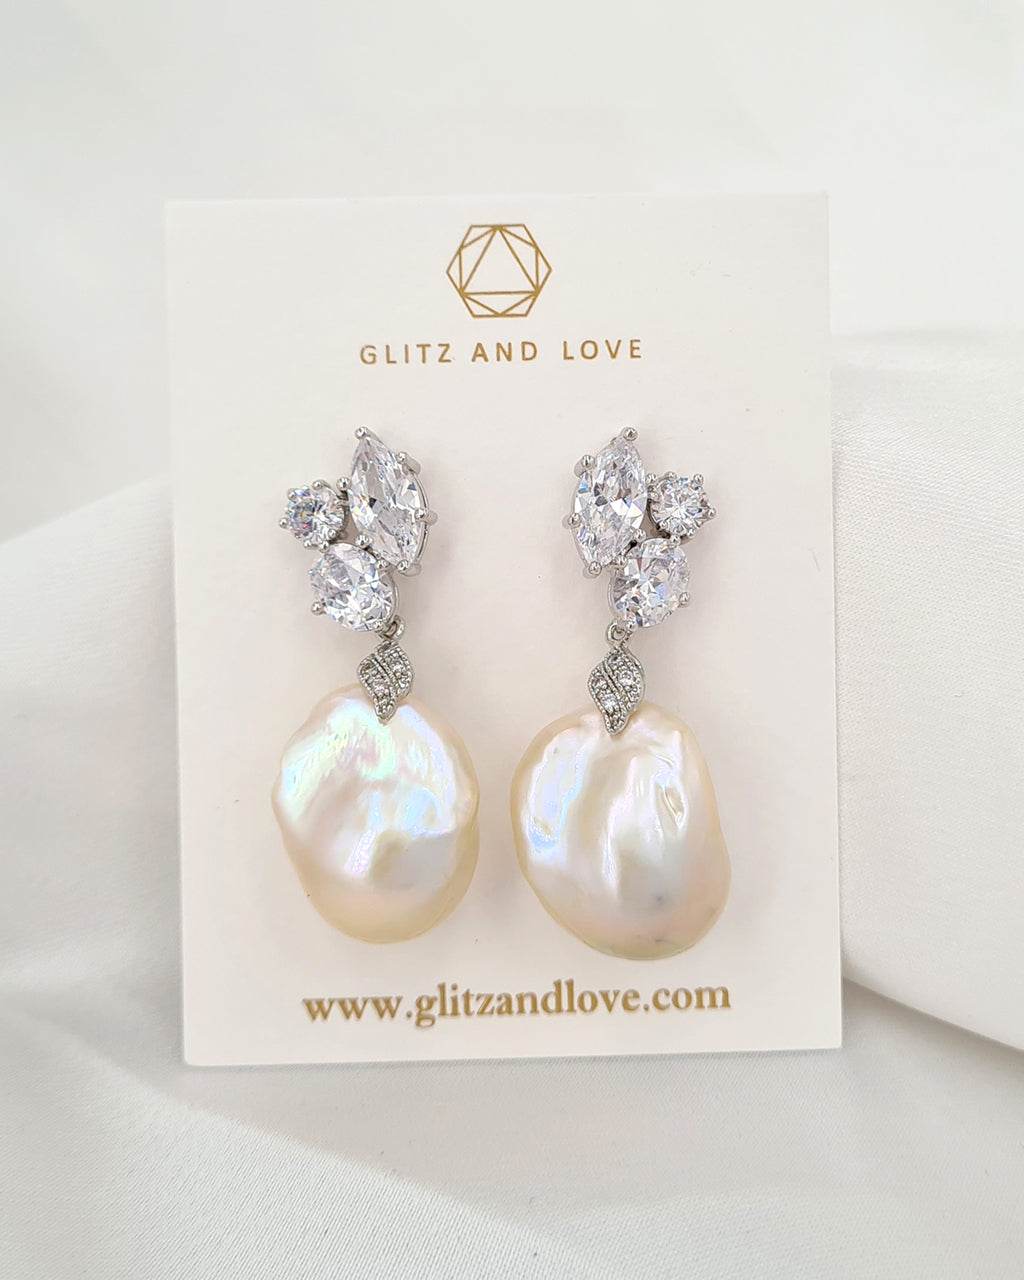 Statement White Baroque Pearl Silver Cluster Crystal Earrings - Wedding Bridal Jewelry for Brides and Bridesmaids | Baroque Pearl Jewelry for Mother's Day Gifts